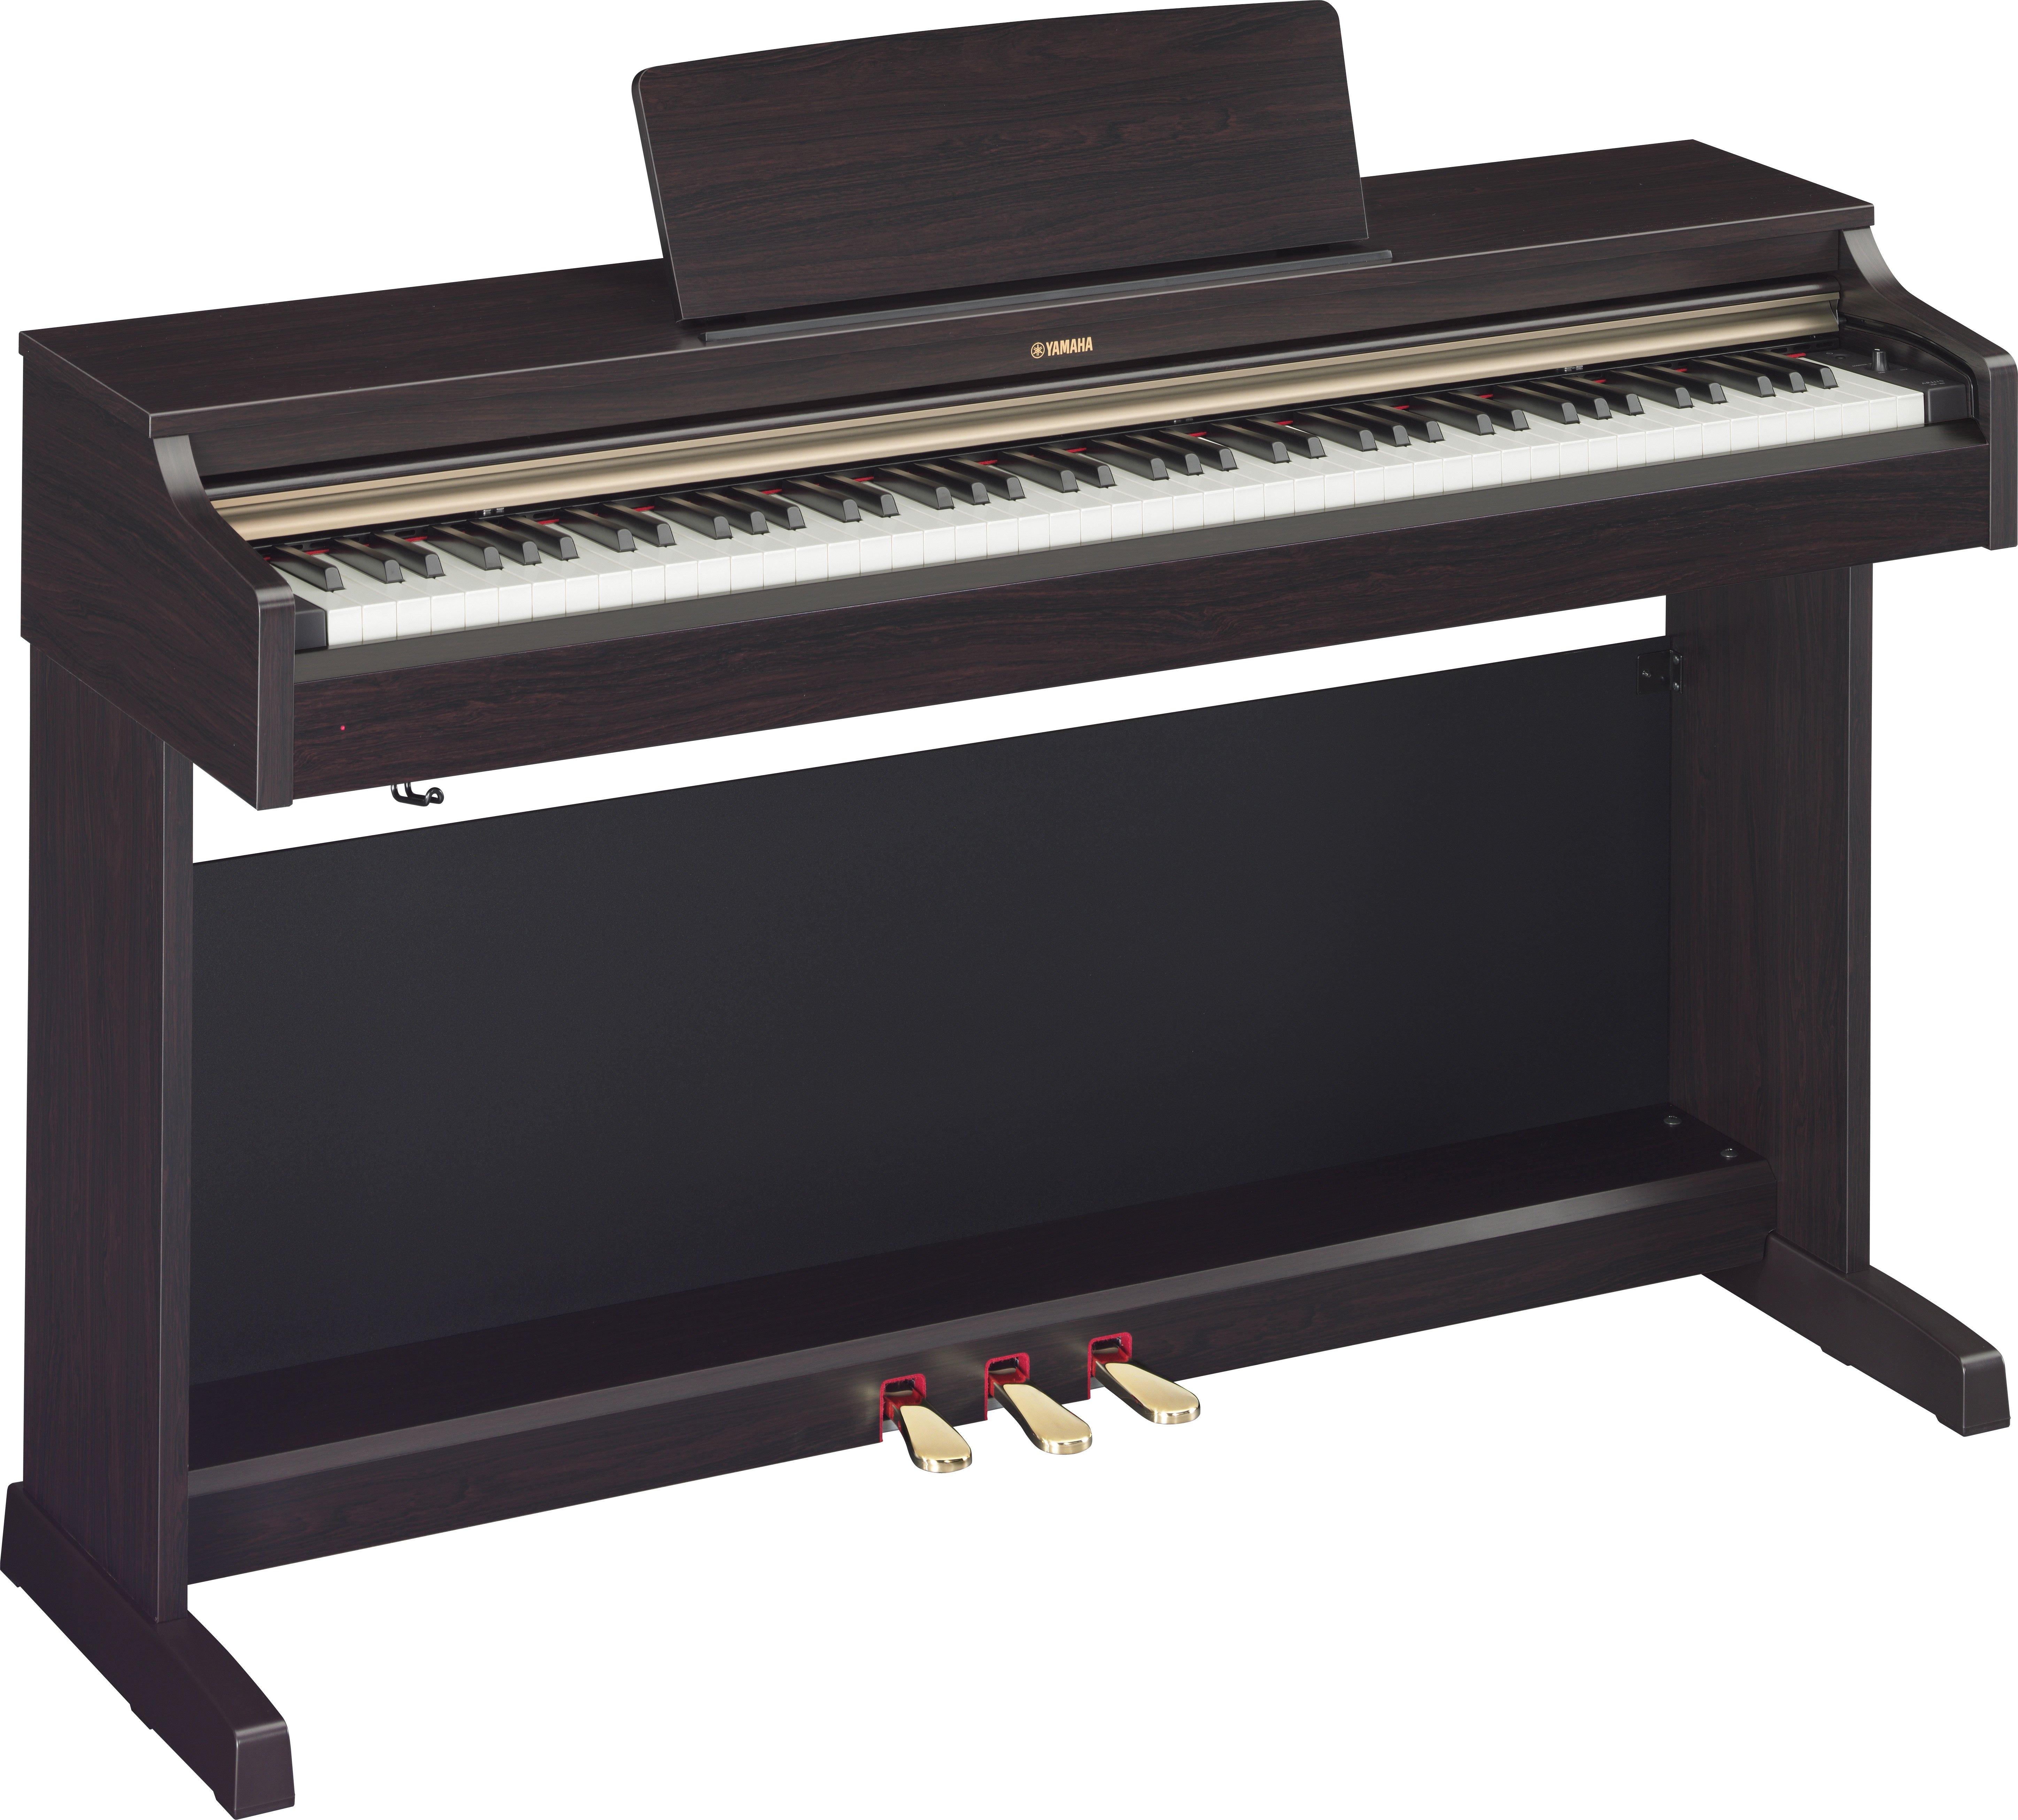 YDP-162 - Overview - ARIUS - Pianos - Musical Instruments